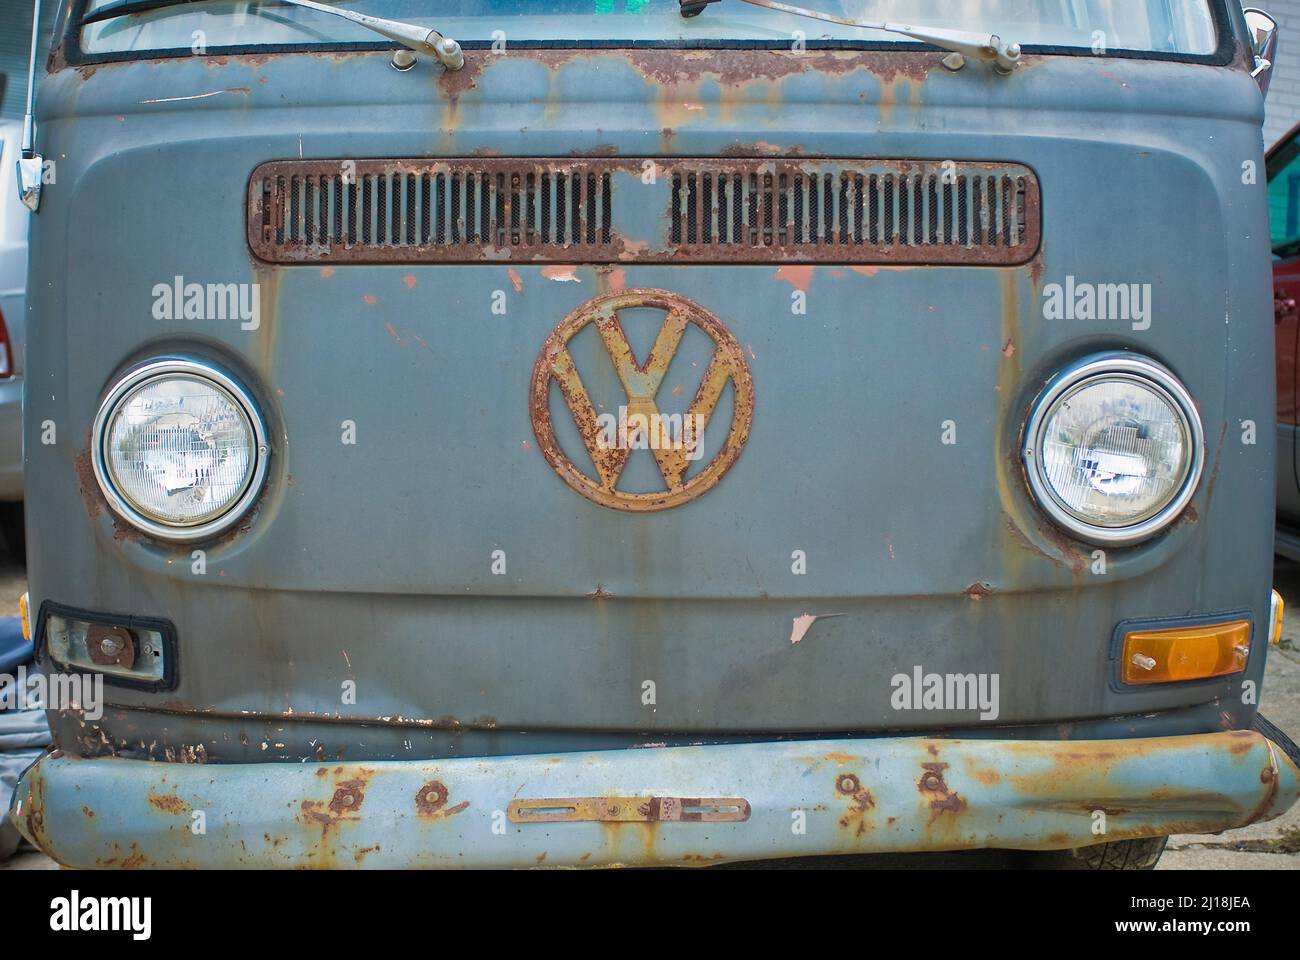 Rusted Volkswagen Bus, Front View Stock Photo